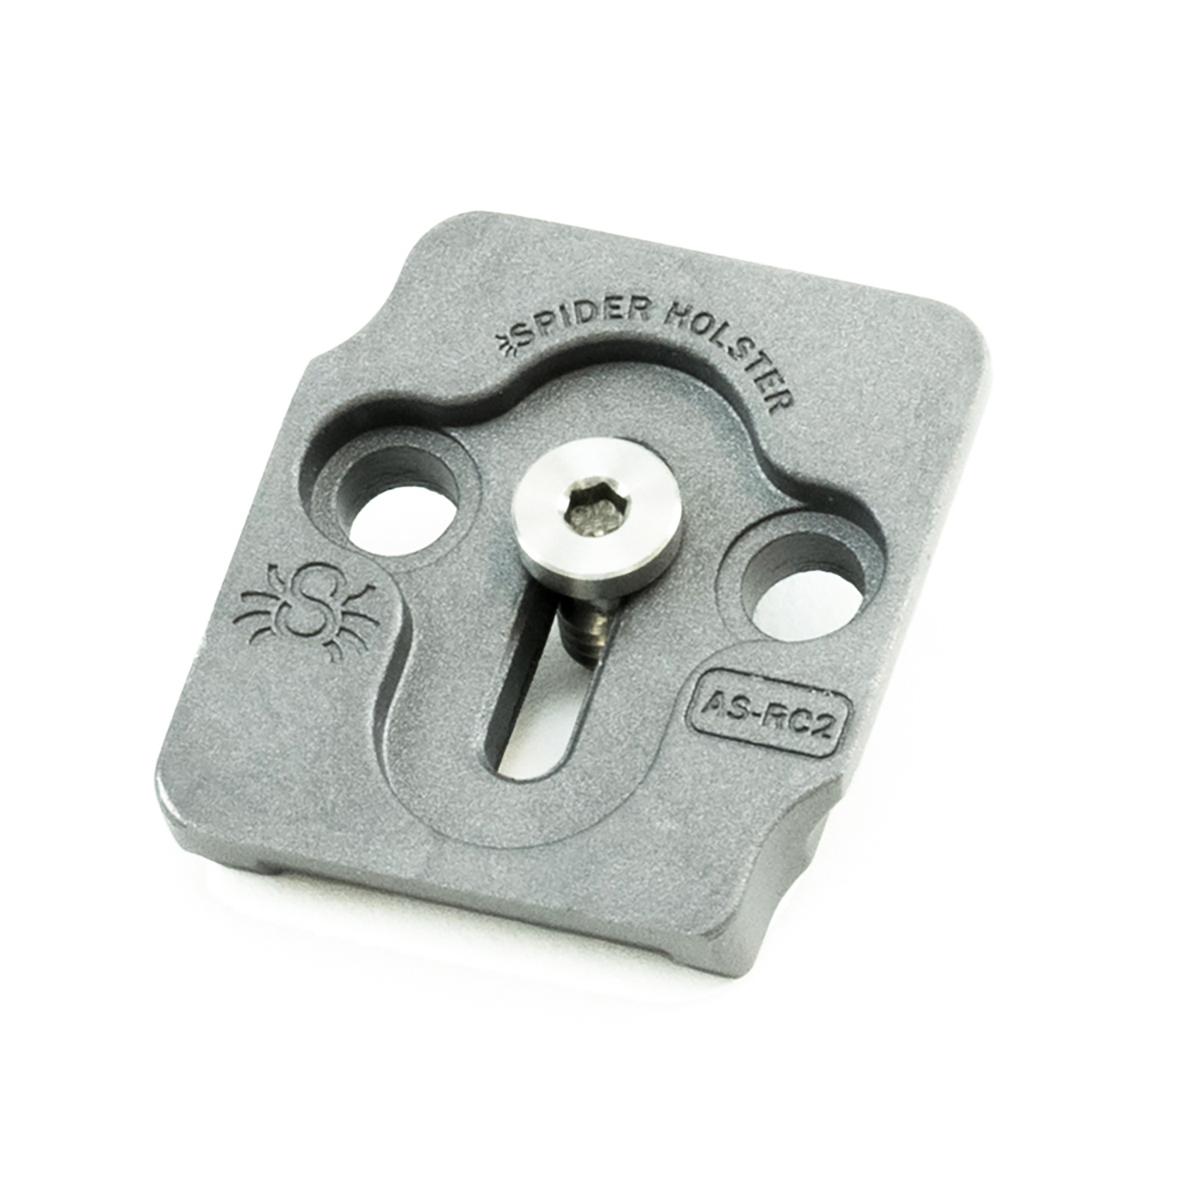 Spider Pro AS-RC2 Plate